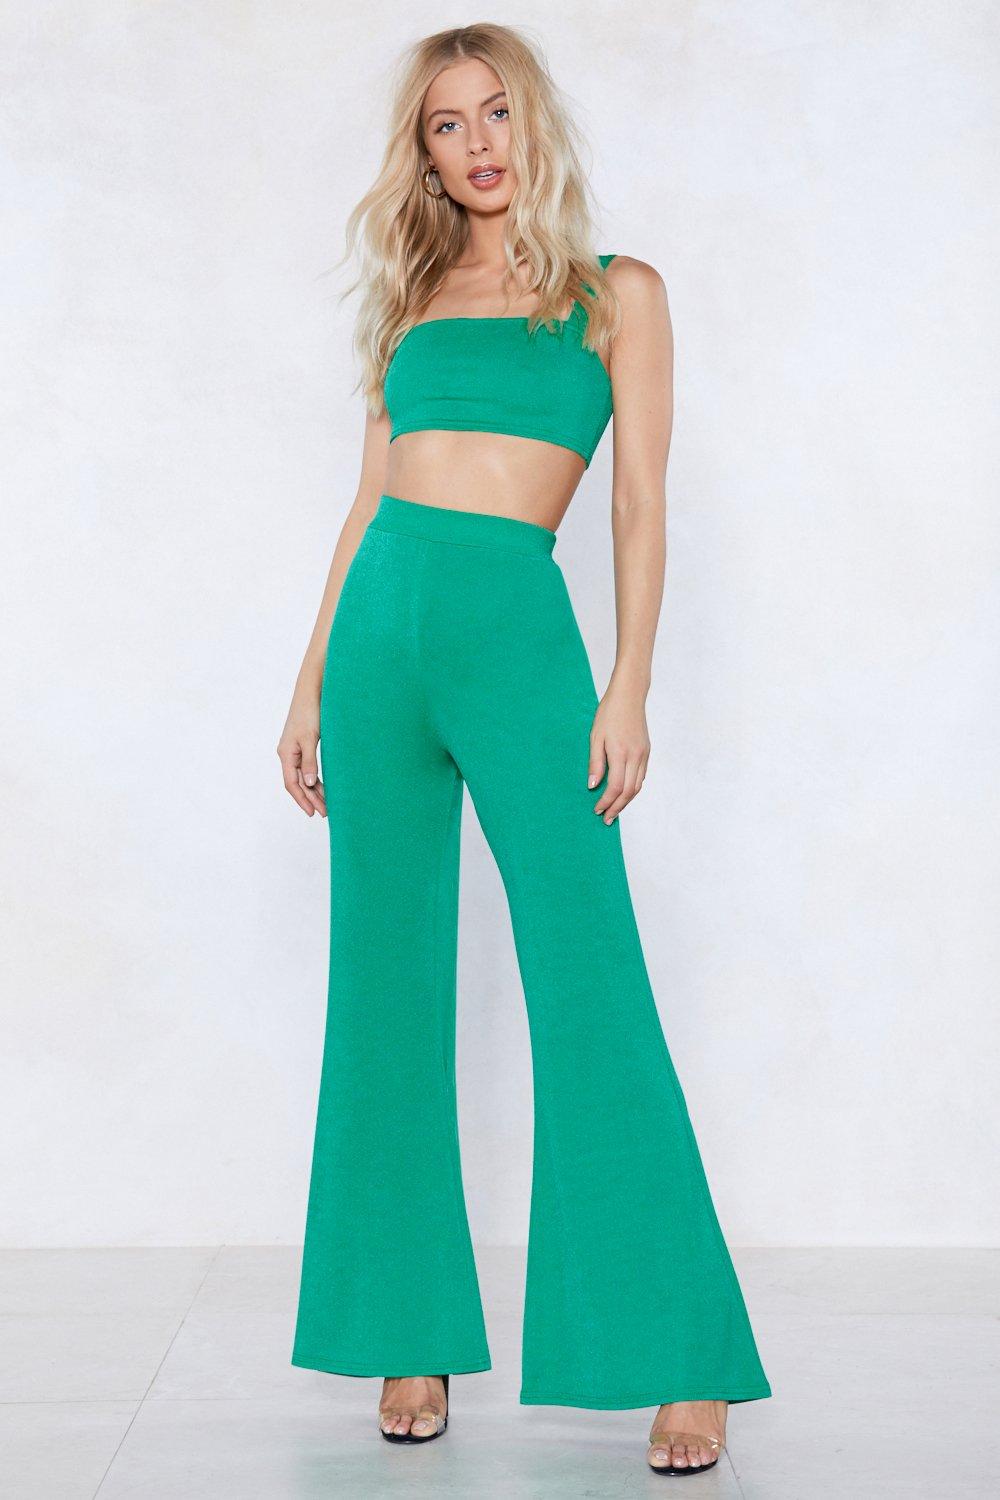 flare pants and crop top